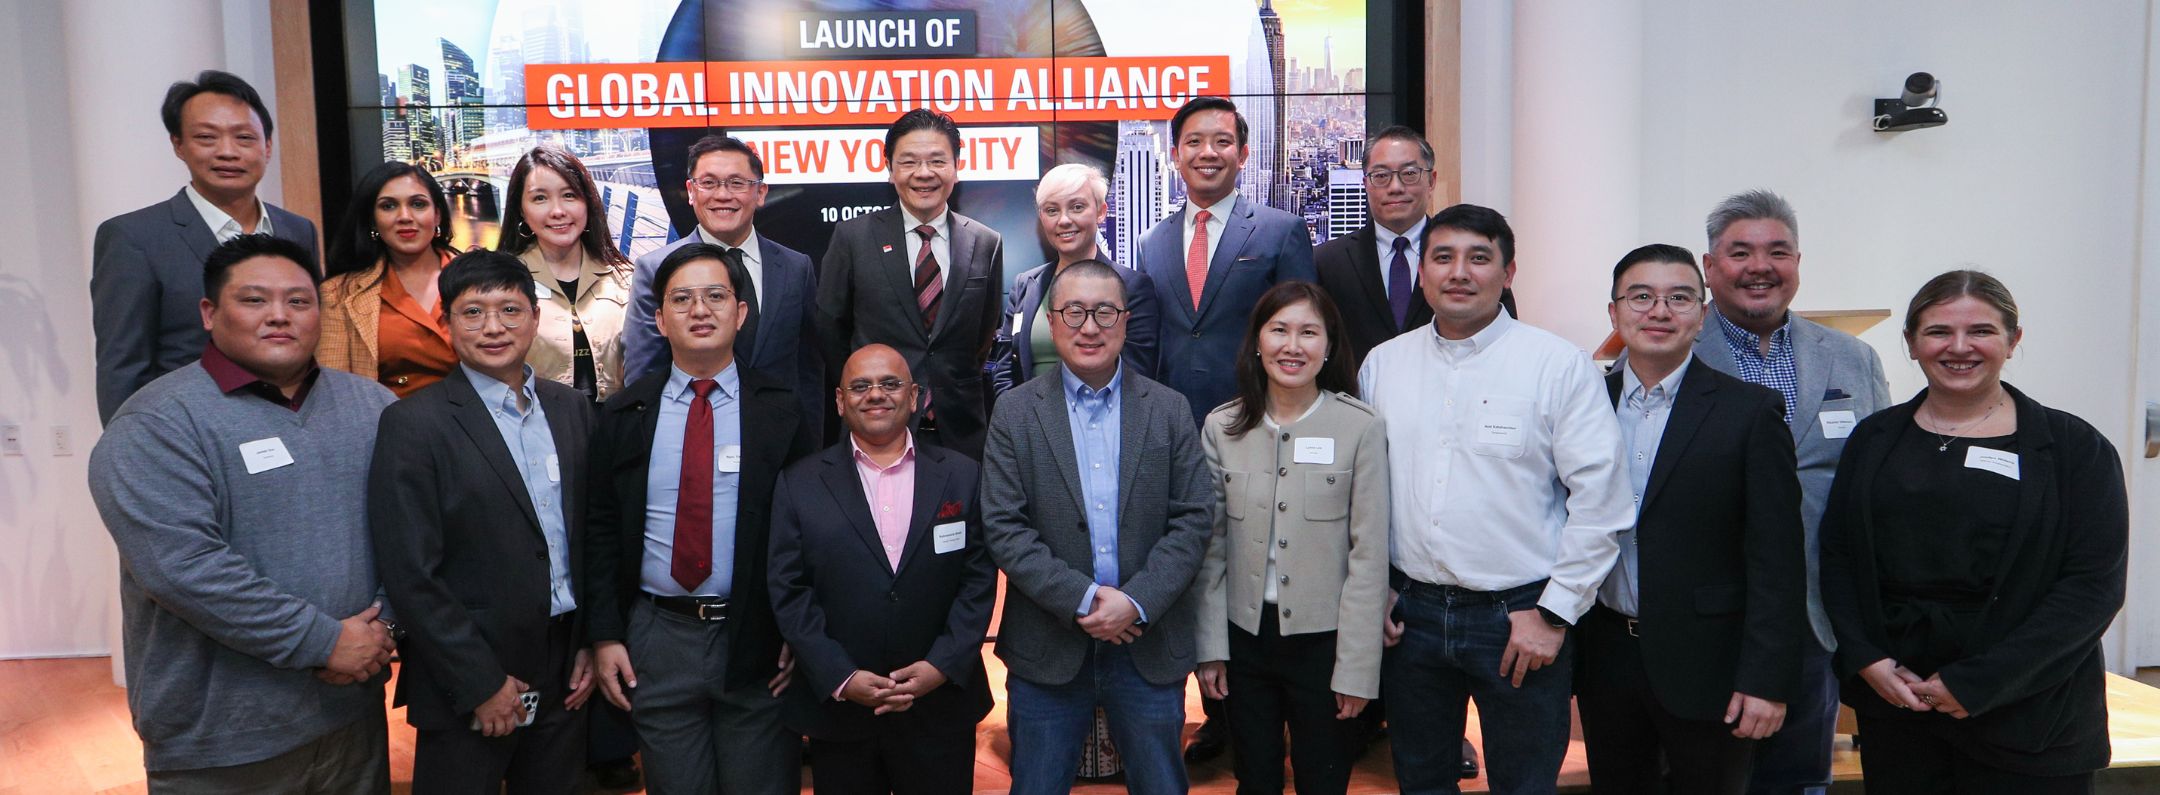 20231011 DPM Wong at the Launch of the Global Innovation Alliance New York City Node_Hero jpg